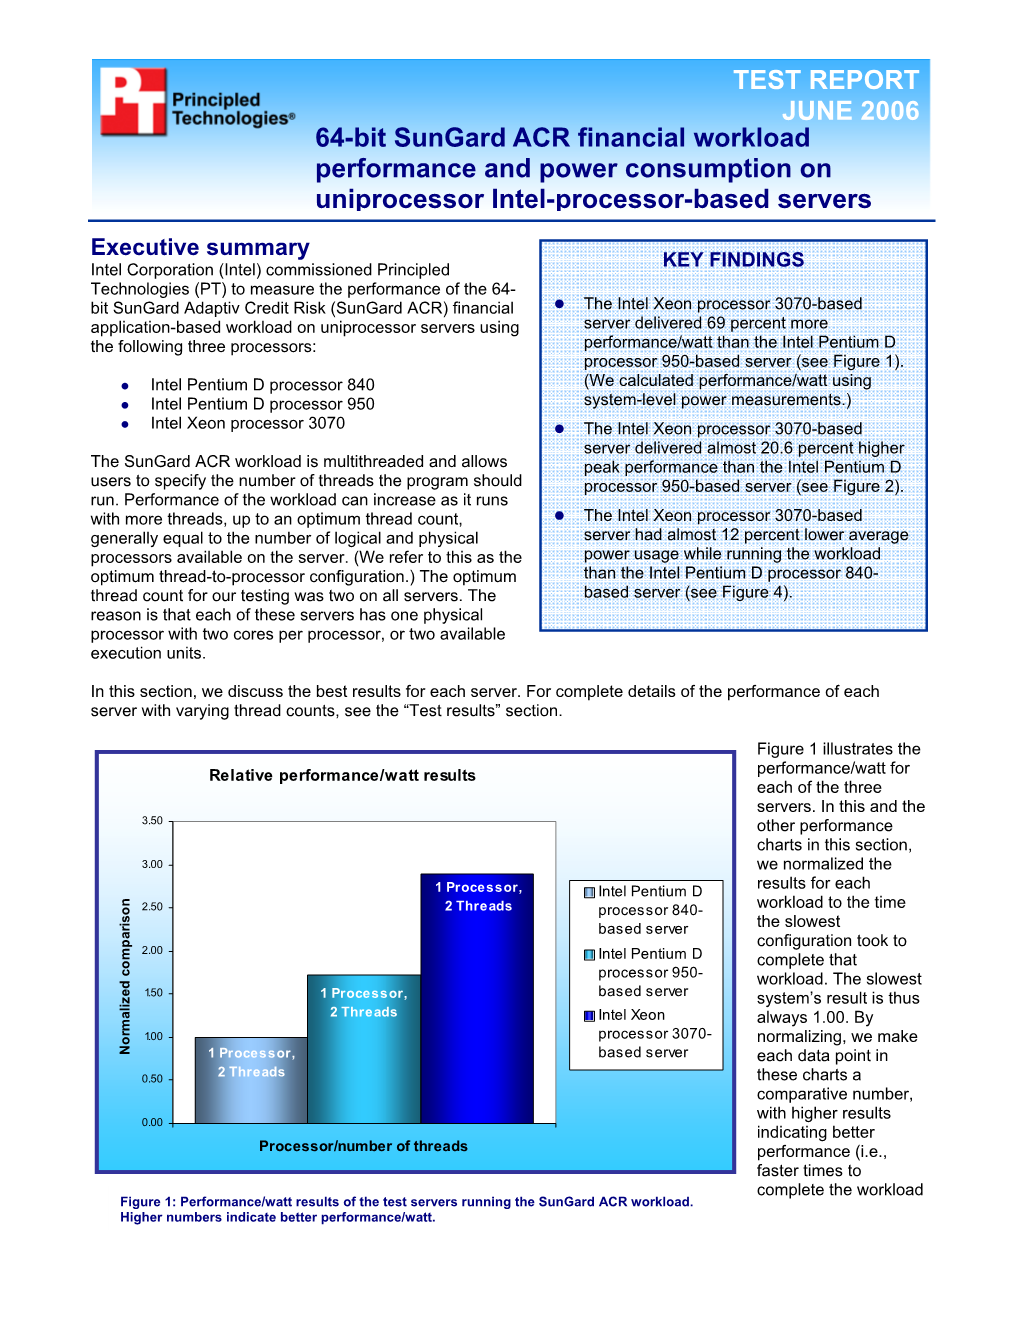 64-Bit Sungard ACR Financial Workload Performance and Power Consumption On